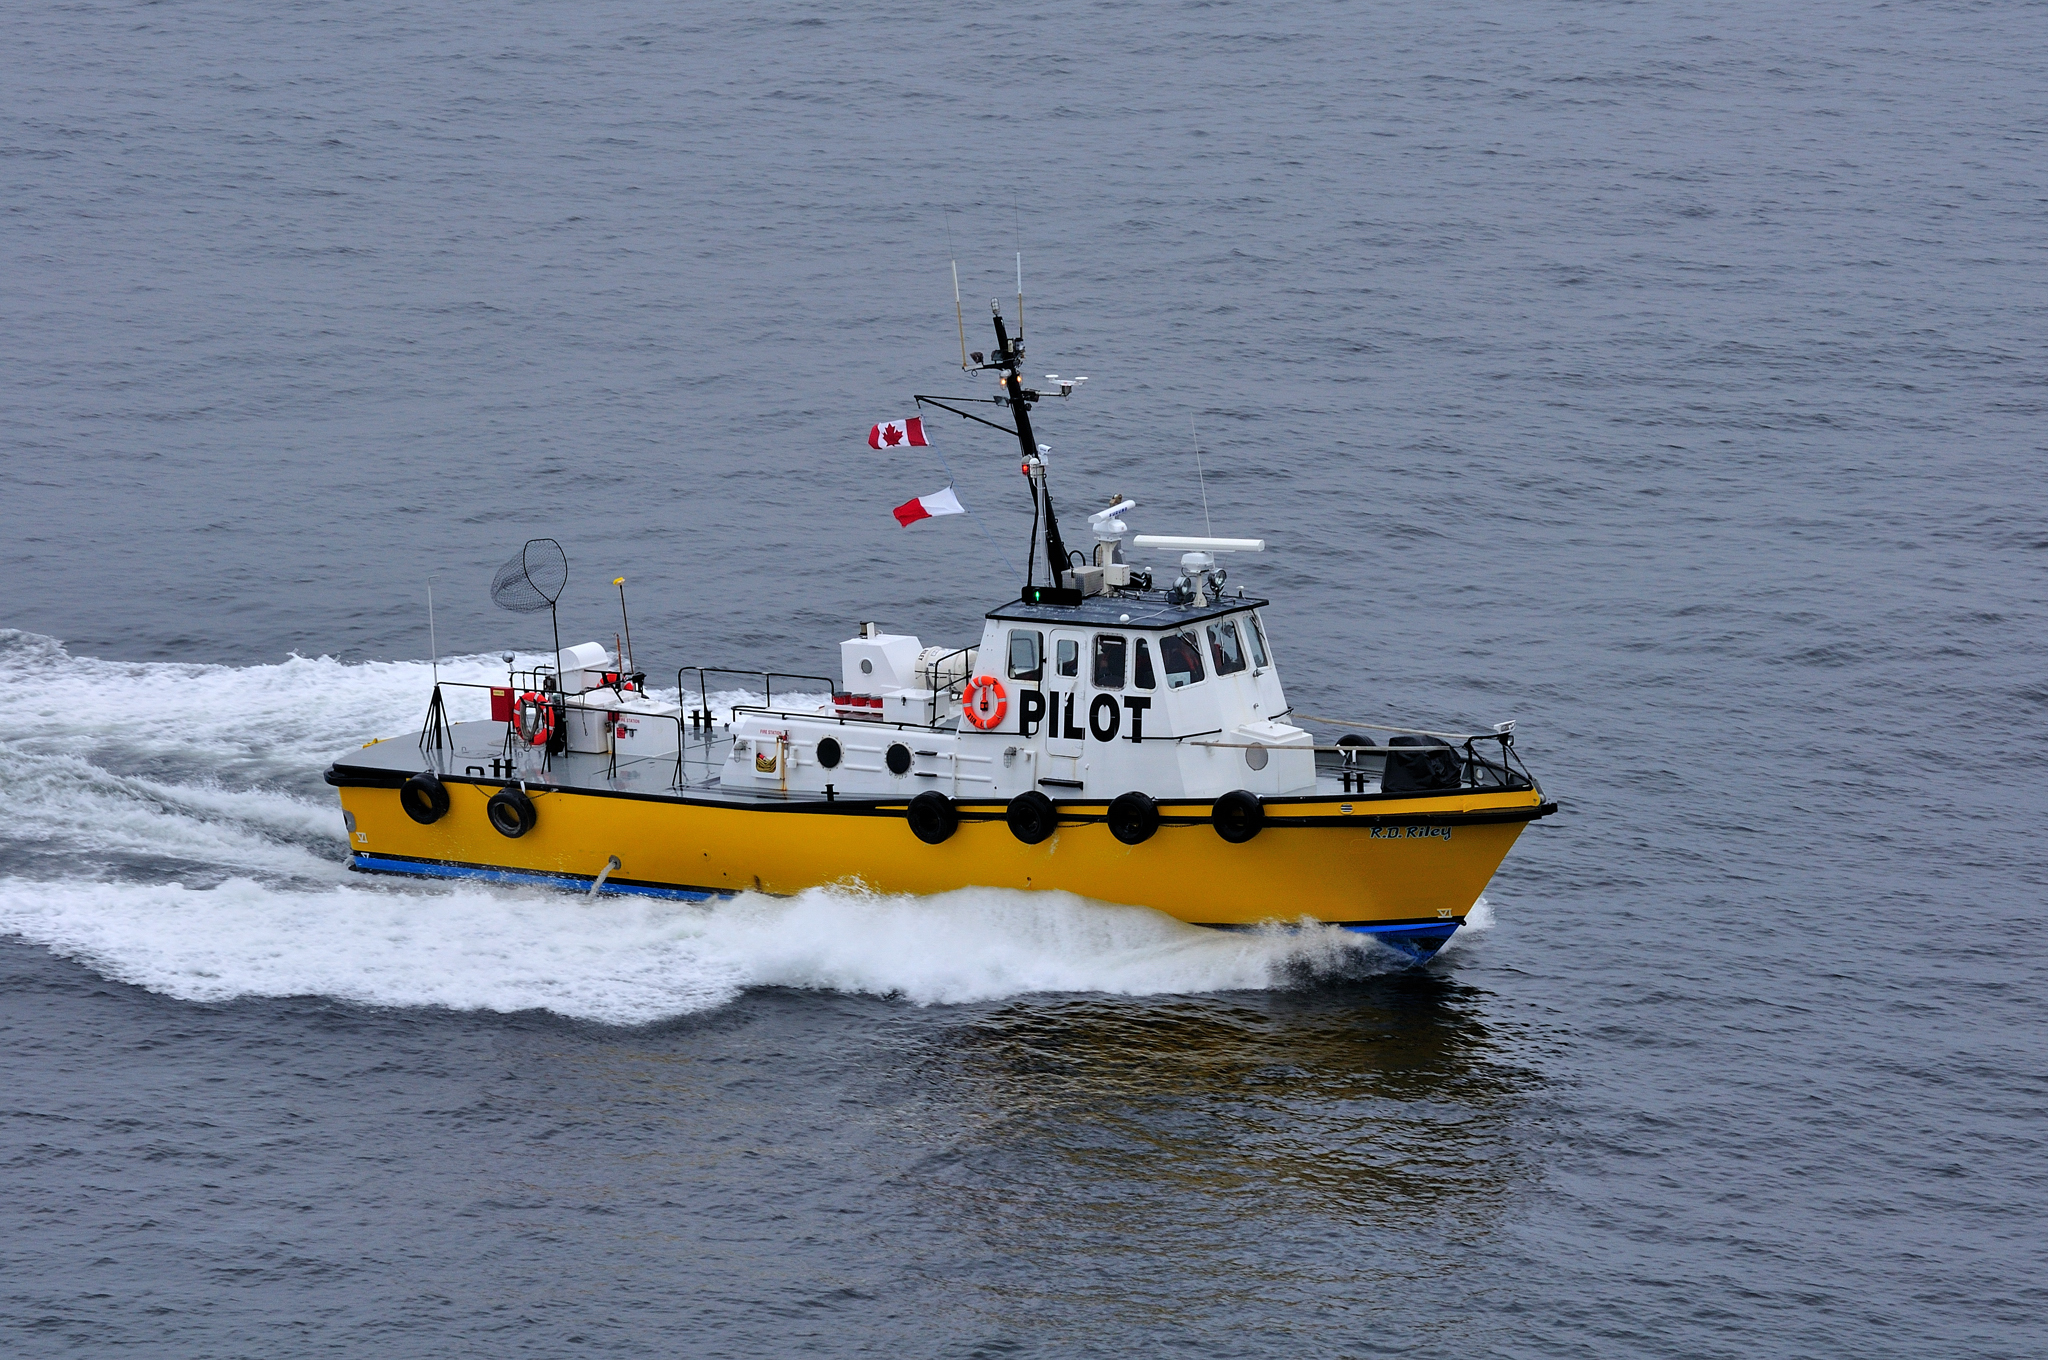 Pilot boat R D Riley on the Hecate Strait